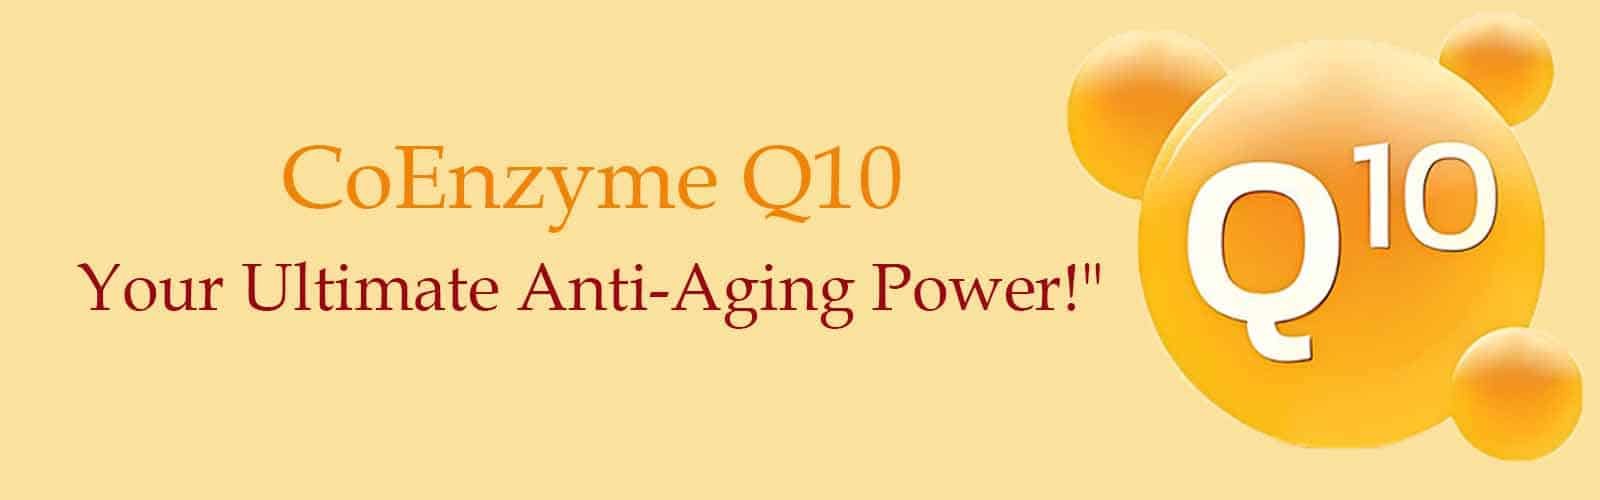 Anti-Aging Treatment Naturally by Using Co-Enzyme Q10 Serum